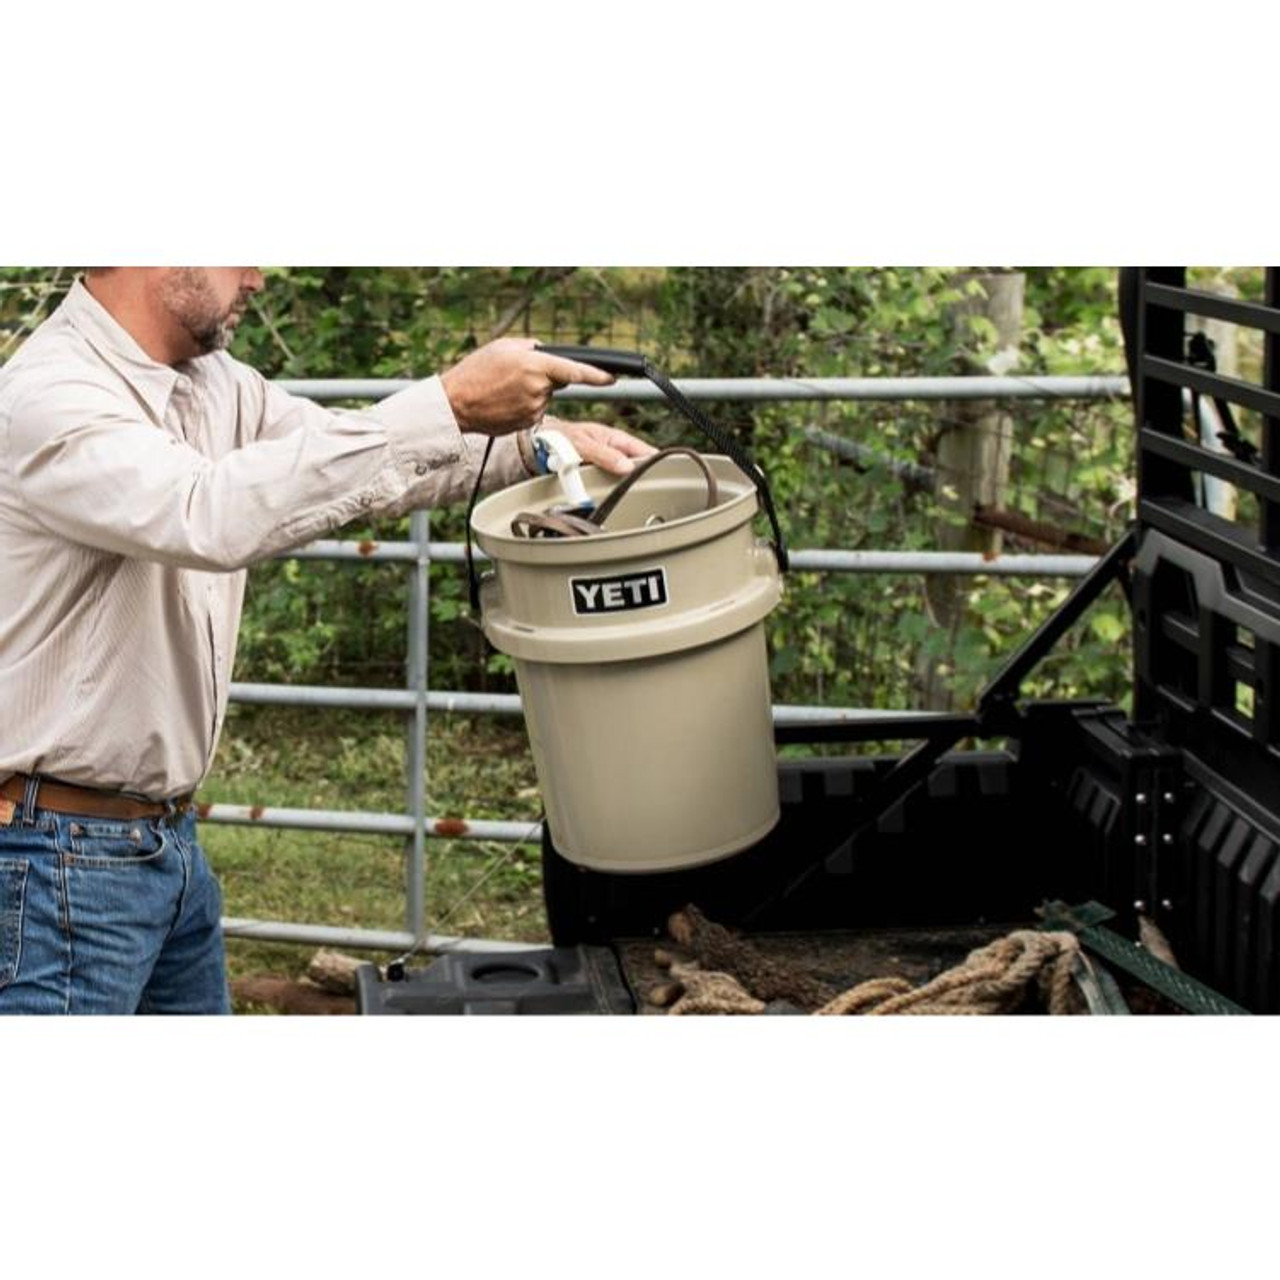 https://cdn11.bigcommerce.com/s-70mih4s/images/stencil/1280x1280/products/15297/37534/Yeti-Loadout-Bucket-Tan-888830025093_image2__13235.1505752835.jpg?c=2